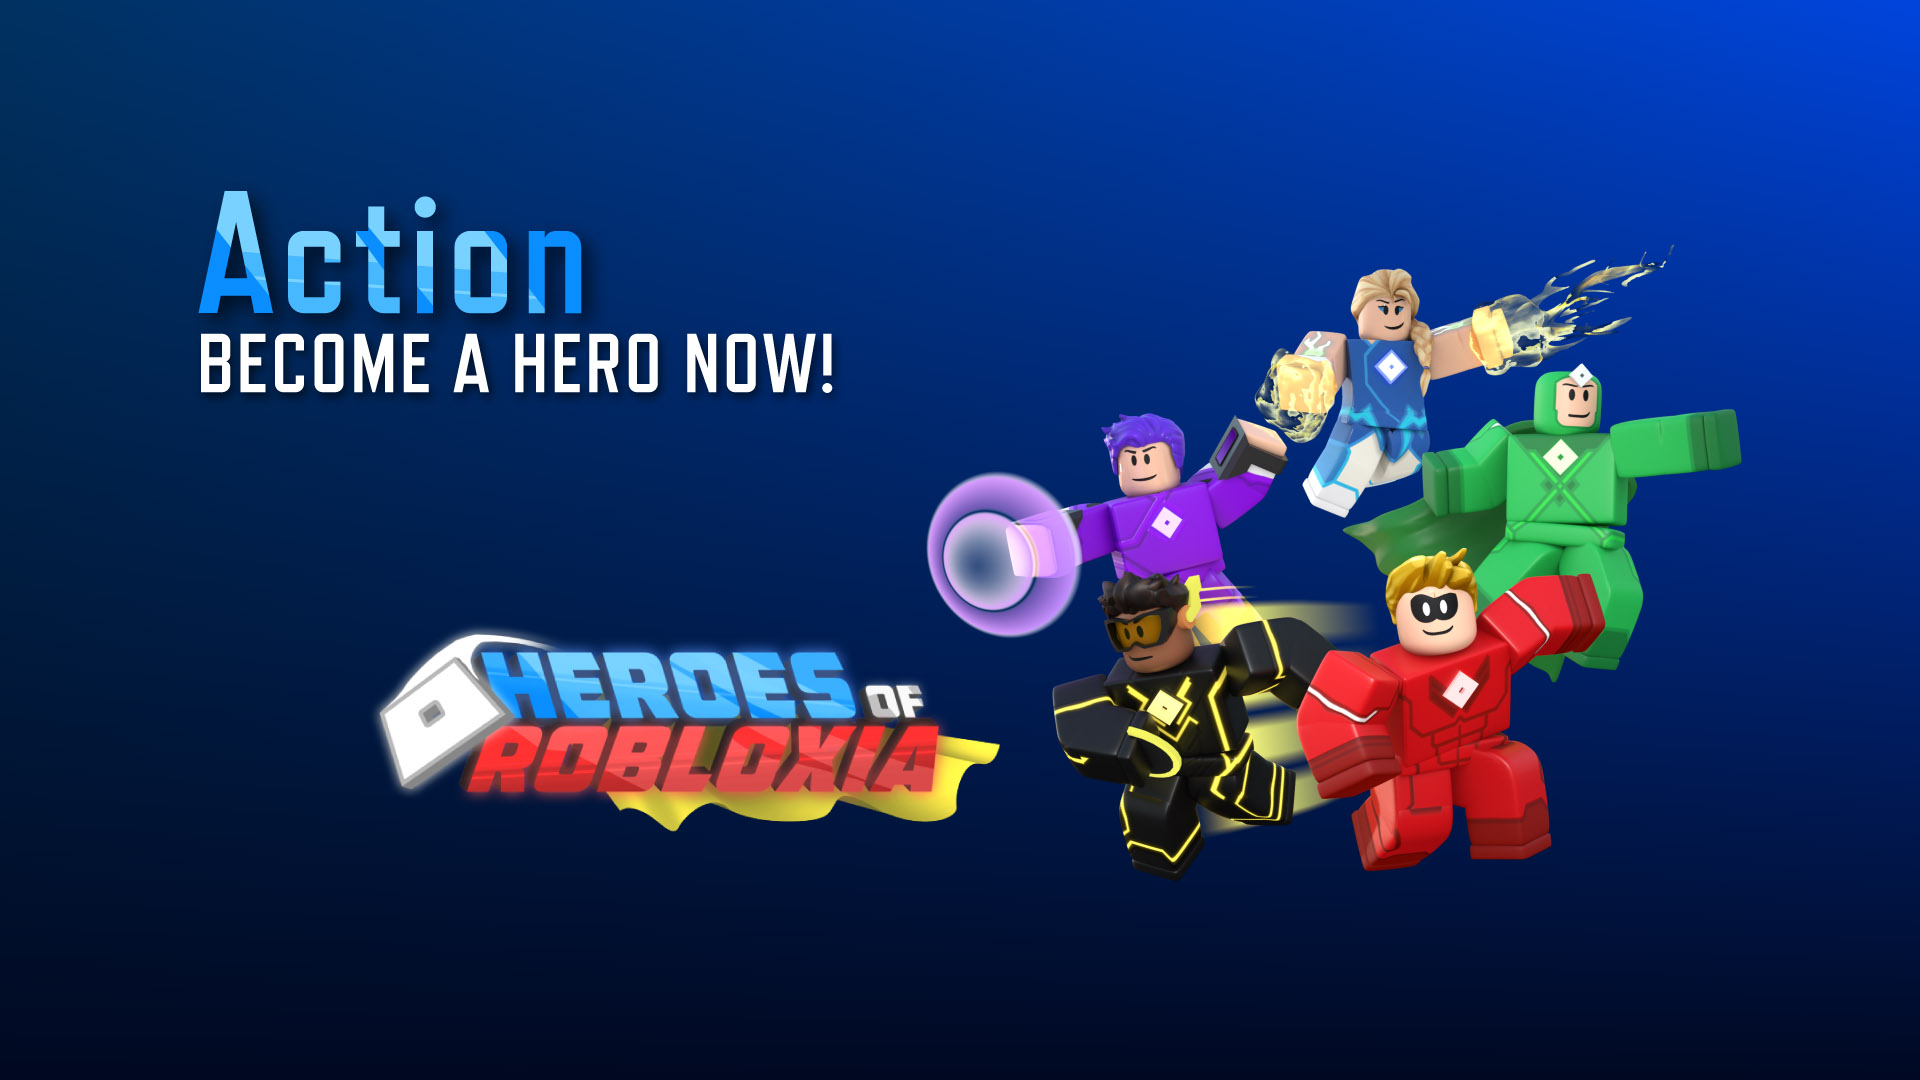 Roblox - Play Heroes of Robloxia on Xbox One and other platforms